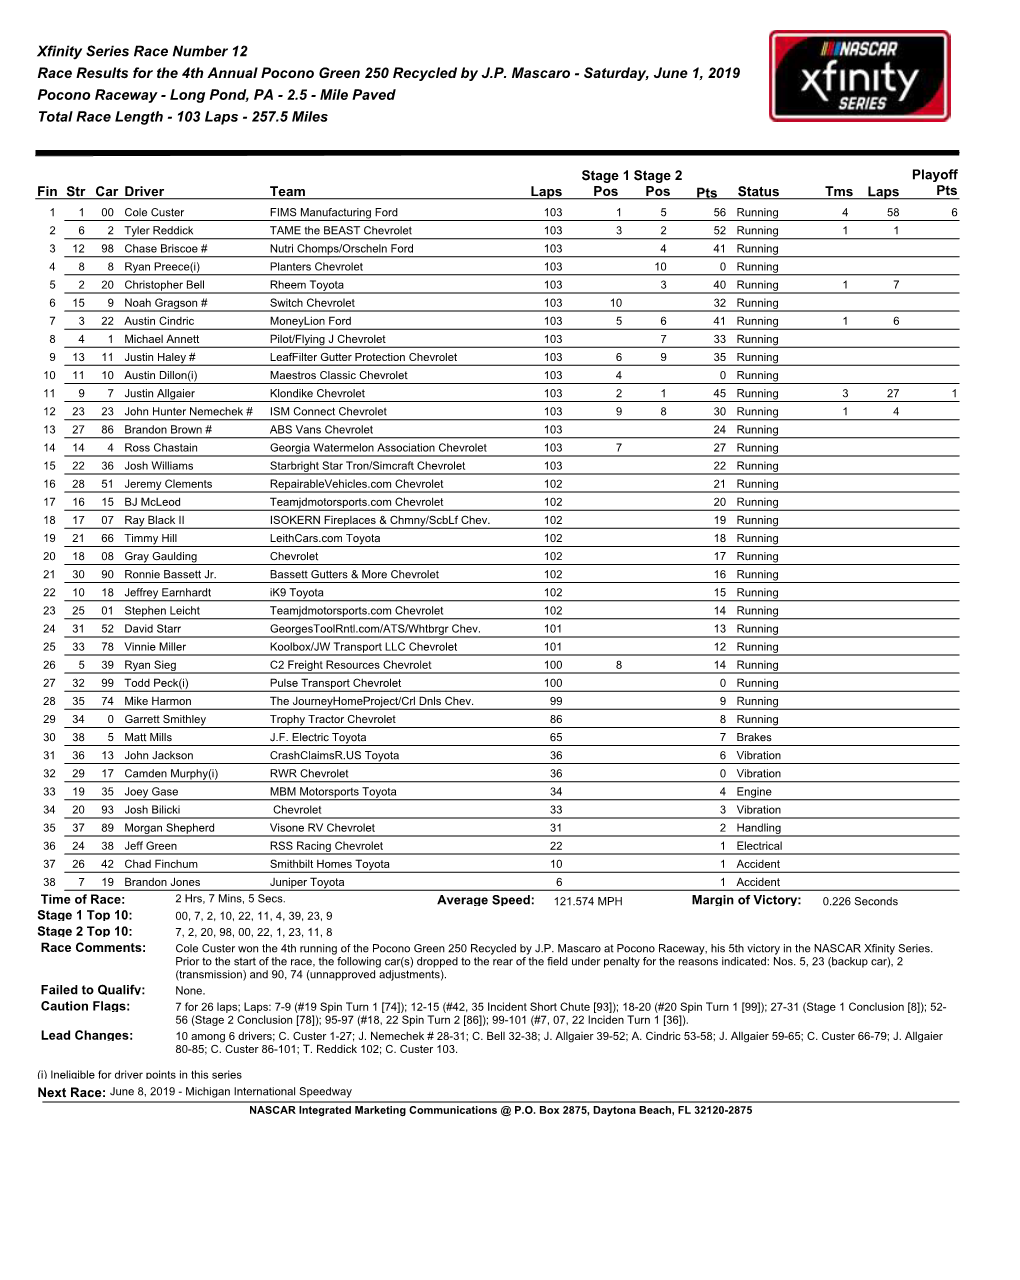 Race Results for the 4Th Annual Pocono Green 250 Recycled by J.P